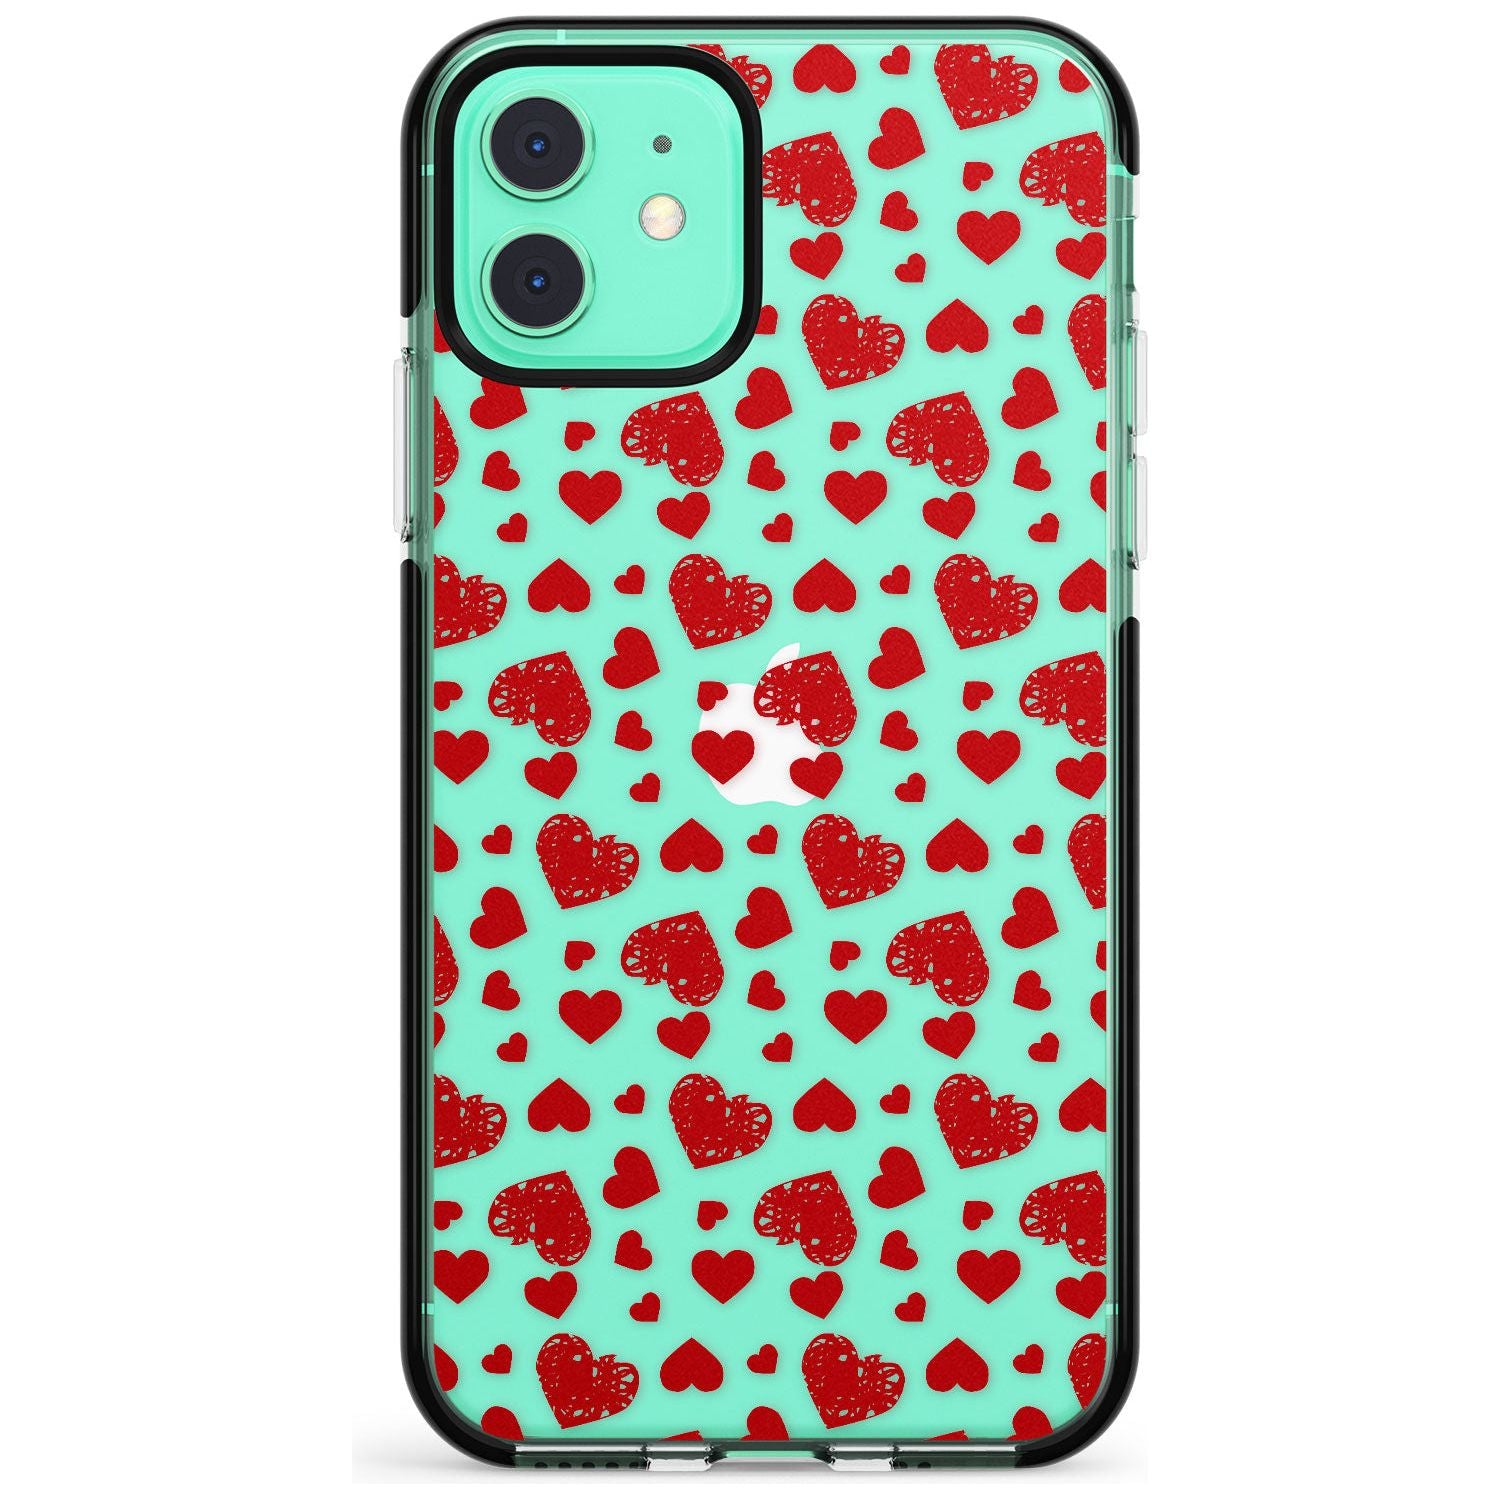 Sketched Heart Pattern Pink Fade Impact Phone Case for iPhone 11 Pro Max